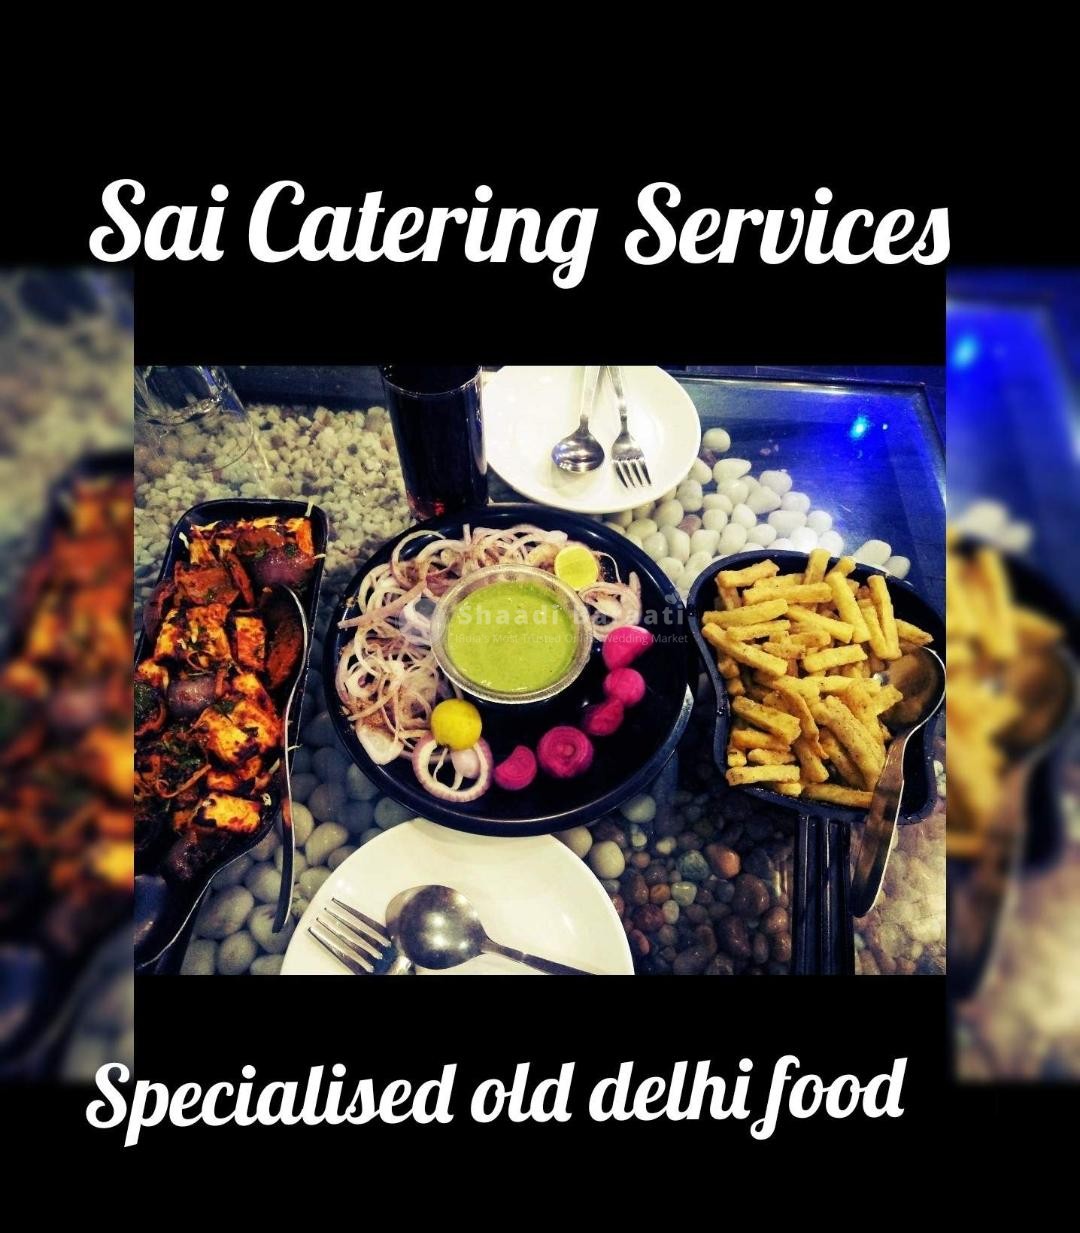 Sai catering services